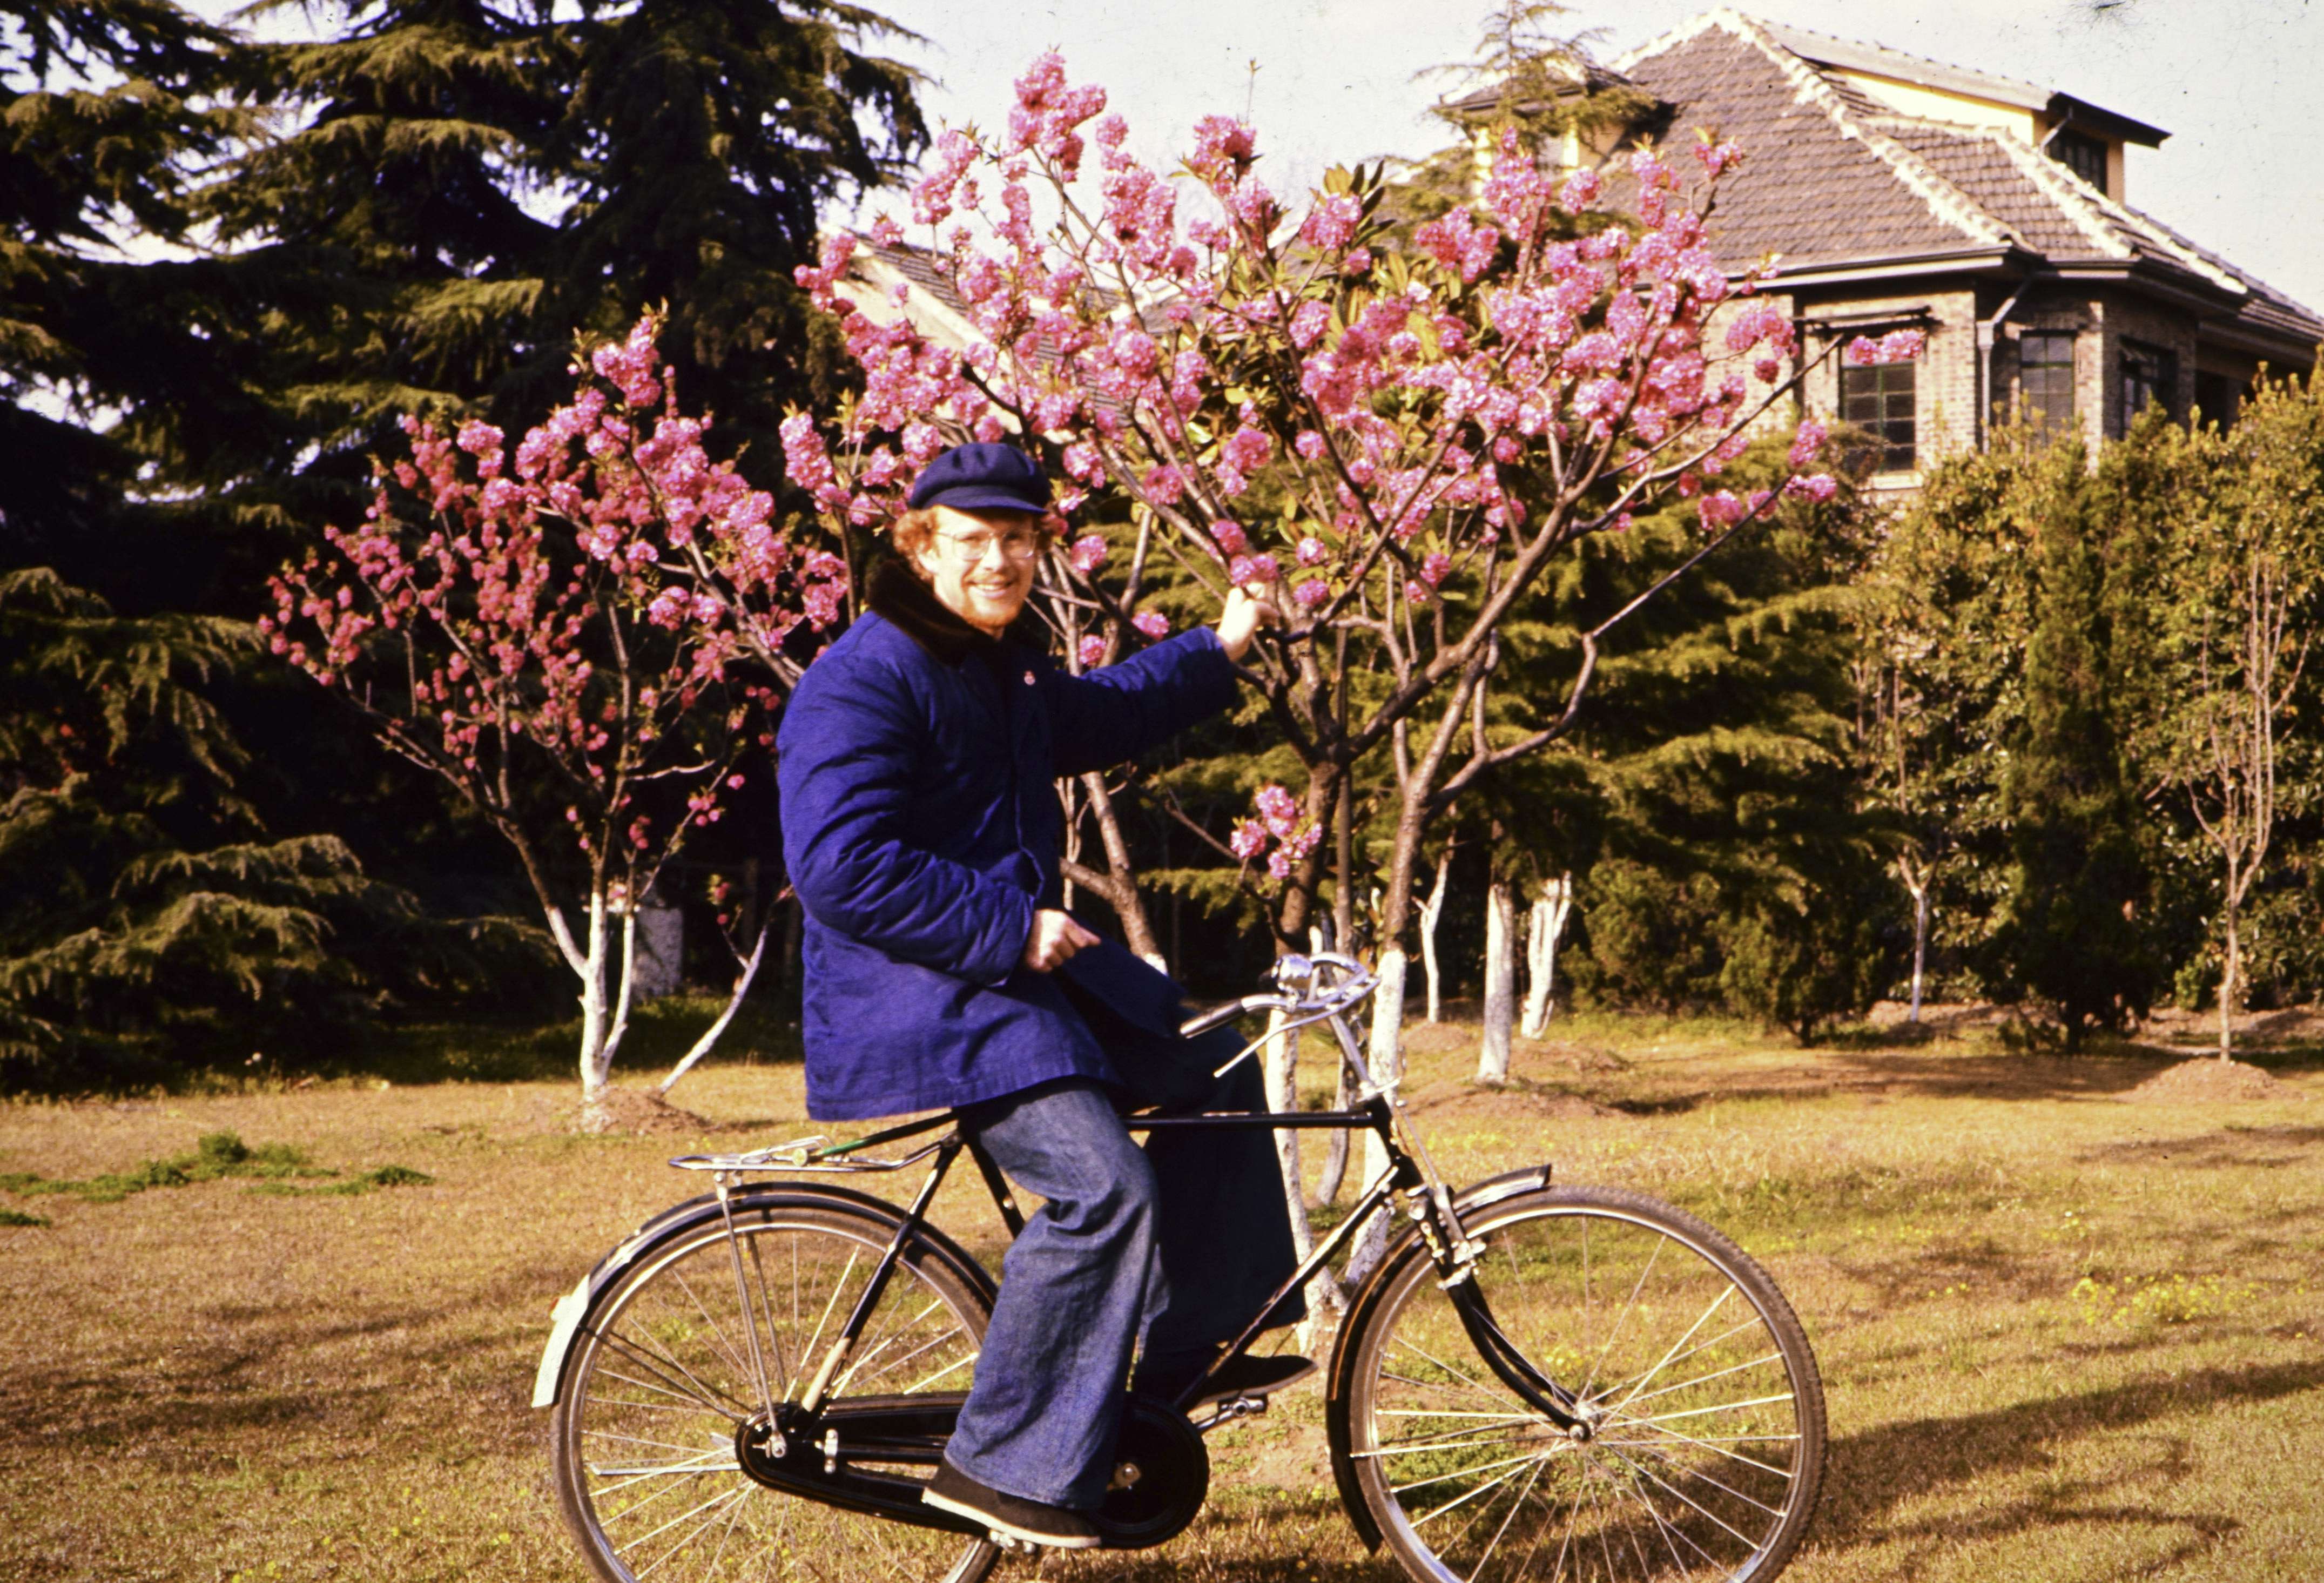 Richard Kirkby in Nanjing, in 1975, where he was forbidden from riding bicycles.